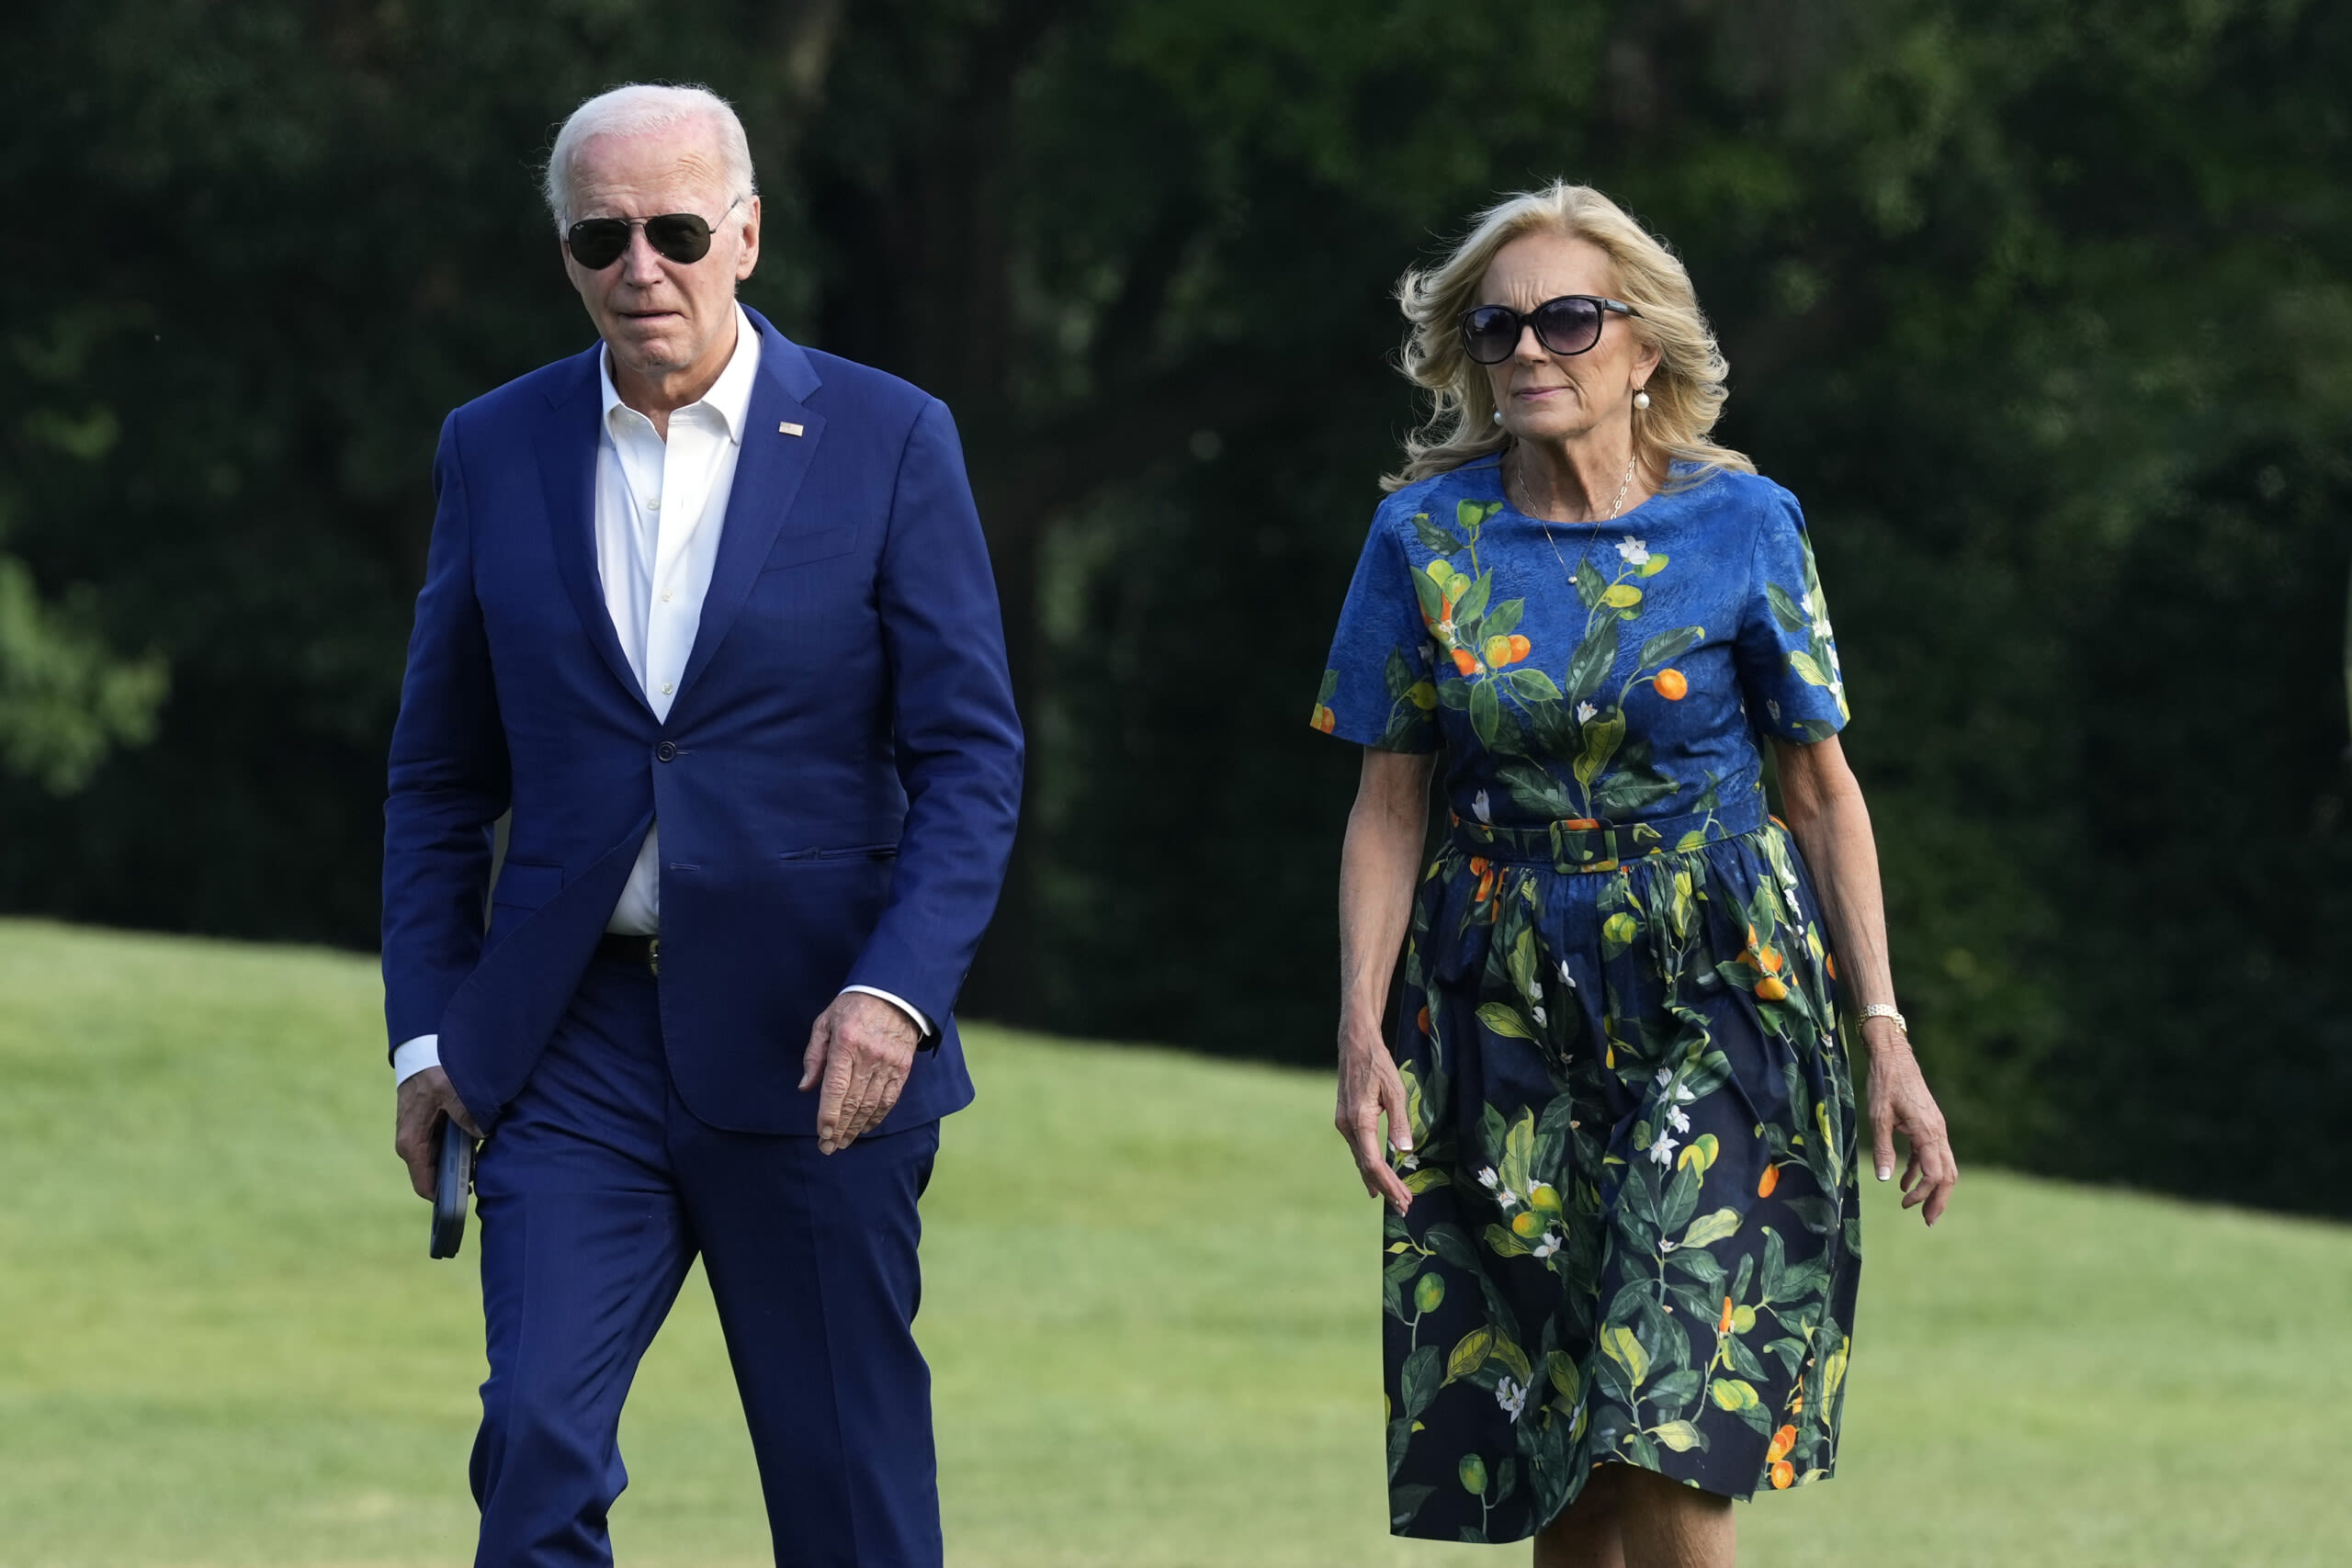 Jill Biden says she's 'all in' on husband's reelection as he insists anew he won't leave the race - ABC Columbia